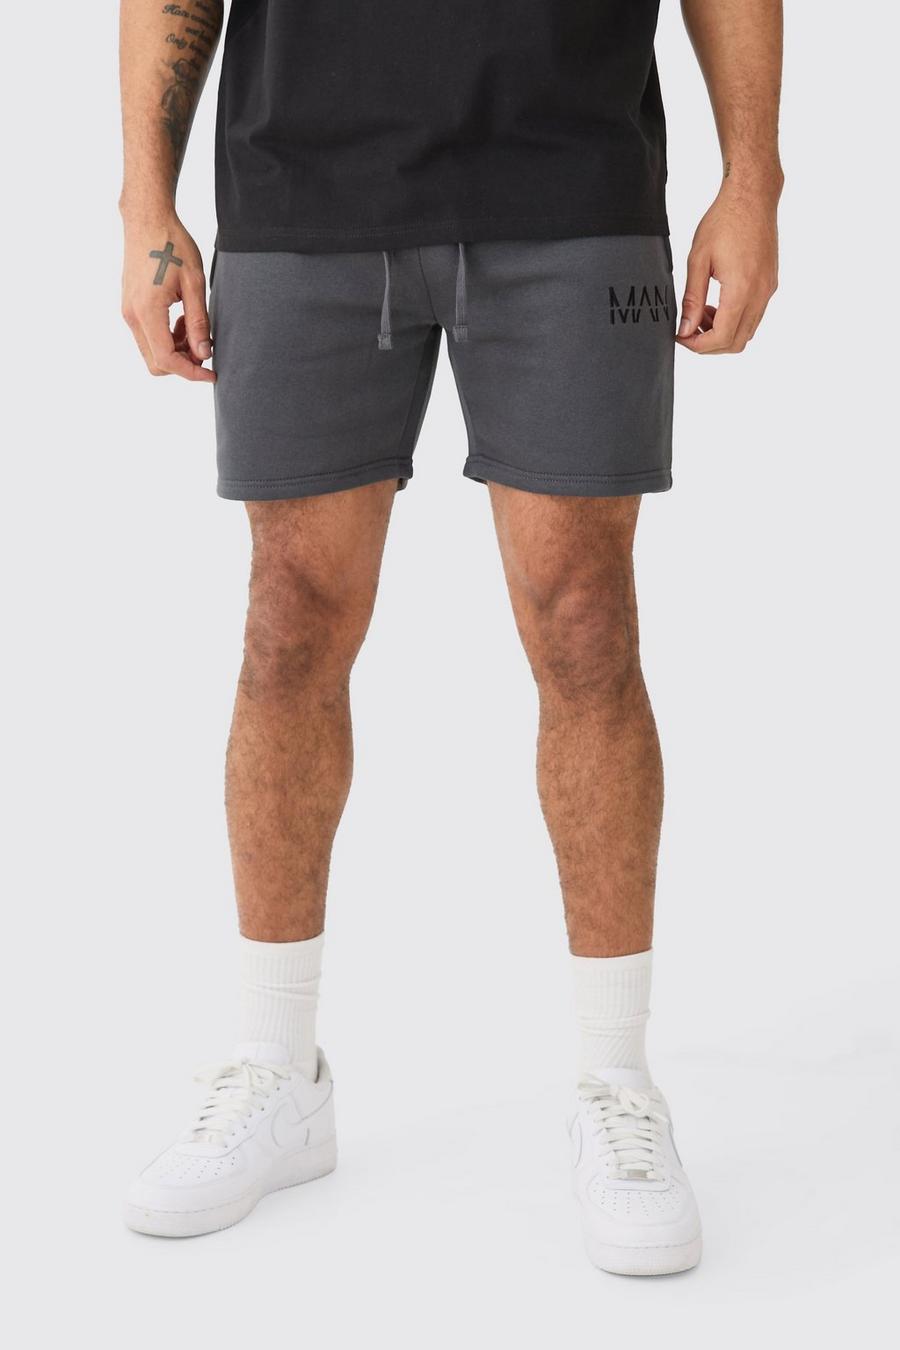 Charcoal NSW Essential Bike Shorts LBR Mid-Rise